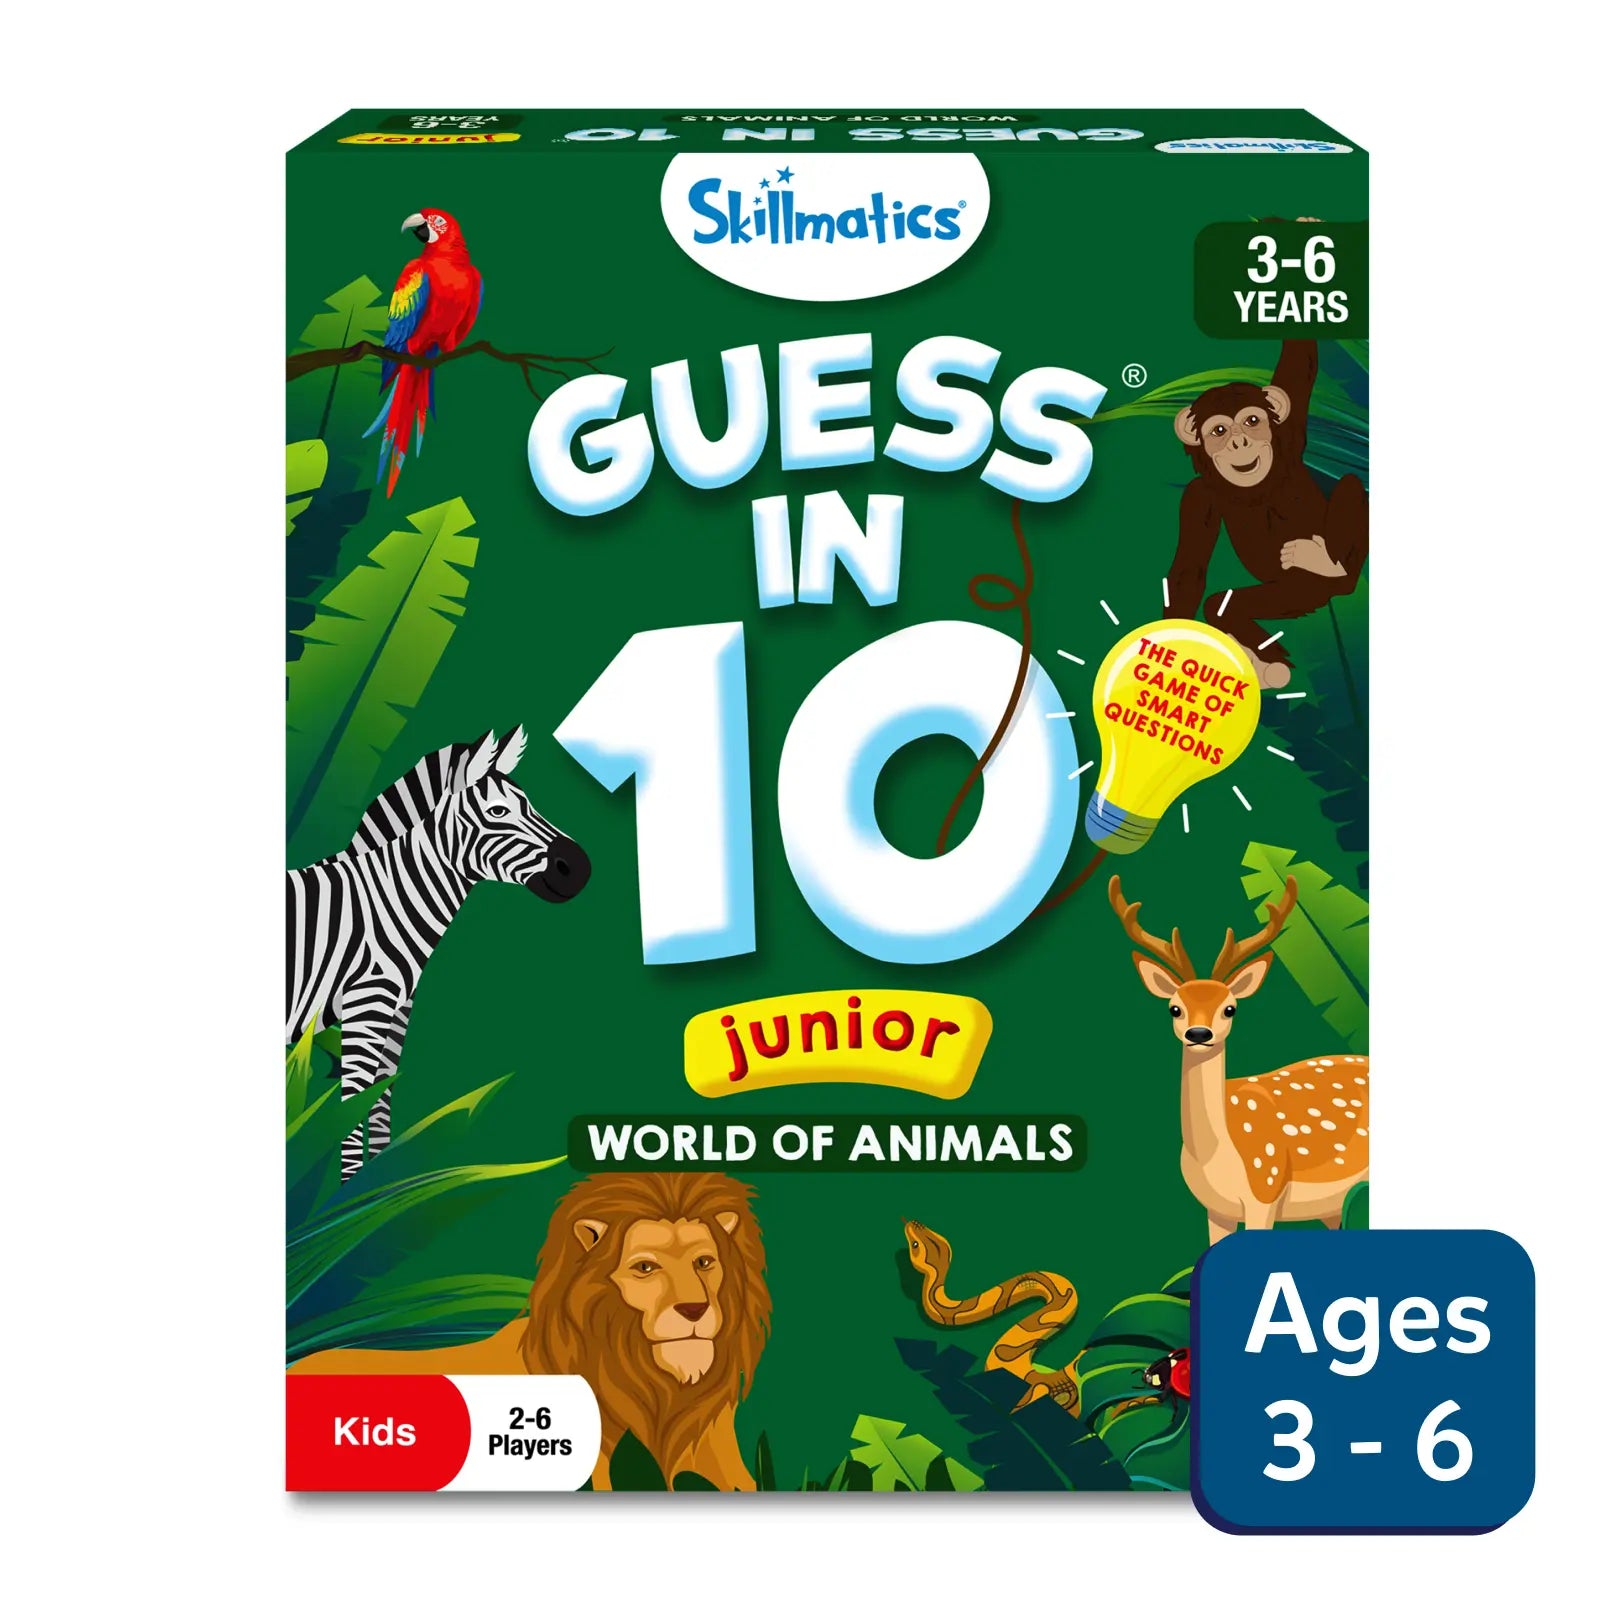 Guess in 10 Junior: World of Animals | Trivia card game (ages 3-6)